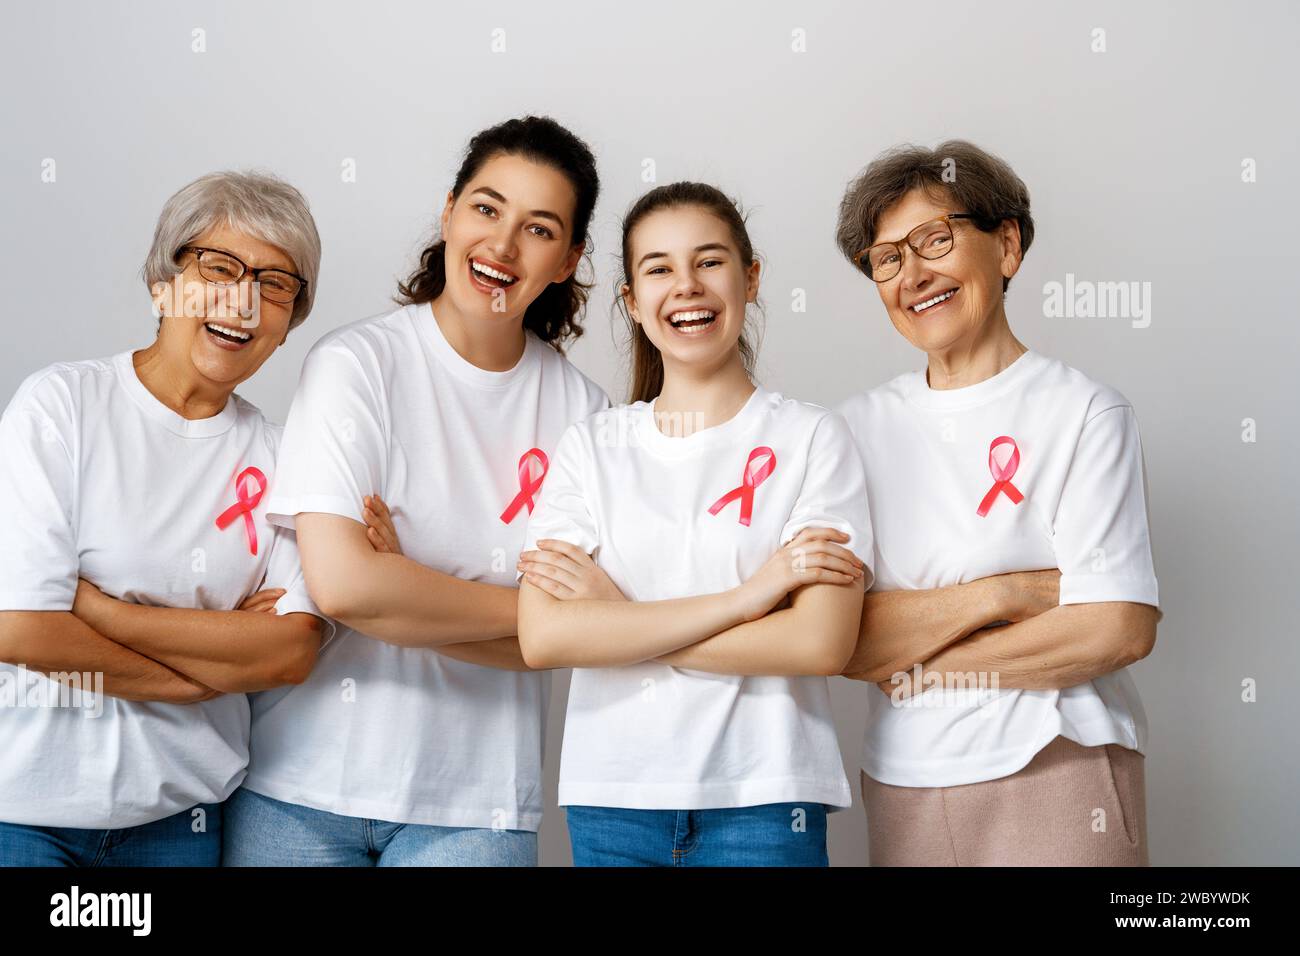 Smiling women with pink satin ribbon symbolizing concept of illness awareness, expressing solidarity and support for cancer patients and survivors. Di Stock Photo